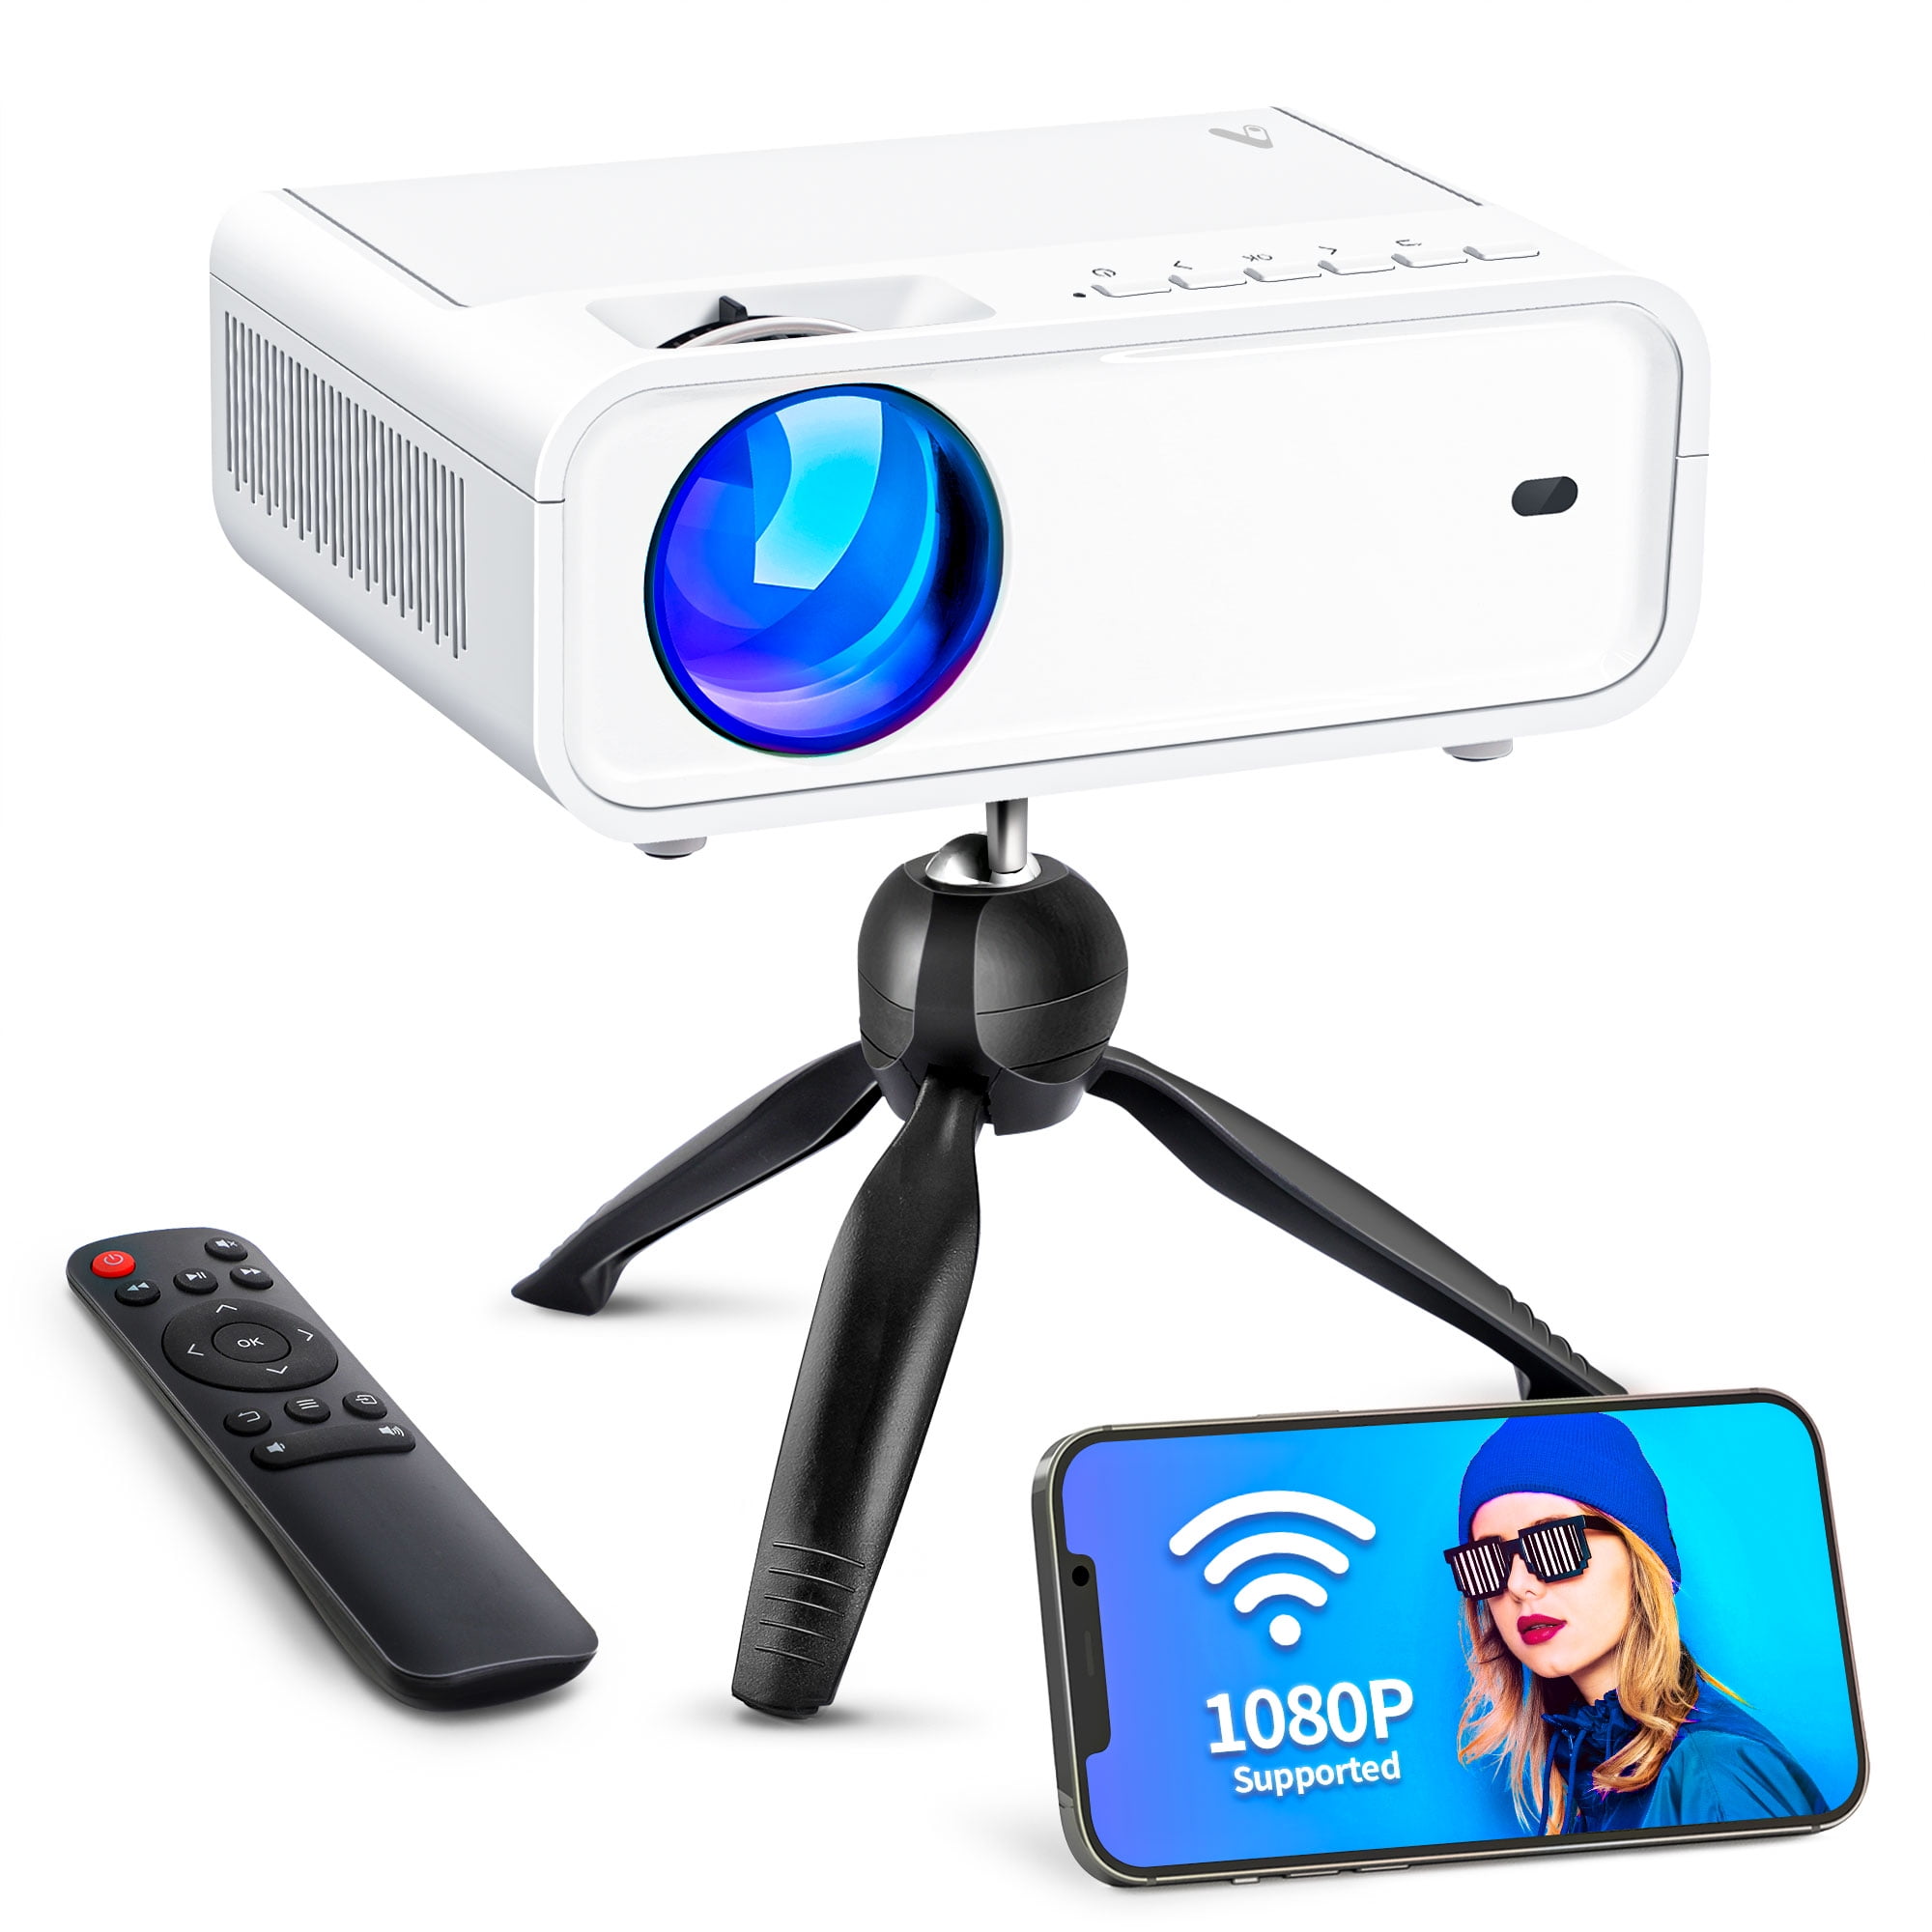 Xxxx Hot Video Girls Video - WiFi Mini Projector w/Tripod, ACROJOY 1080P Supported Video Projector with  240\